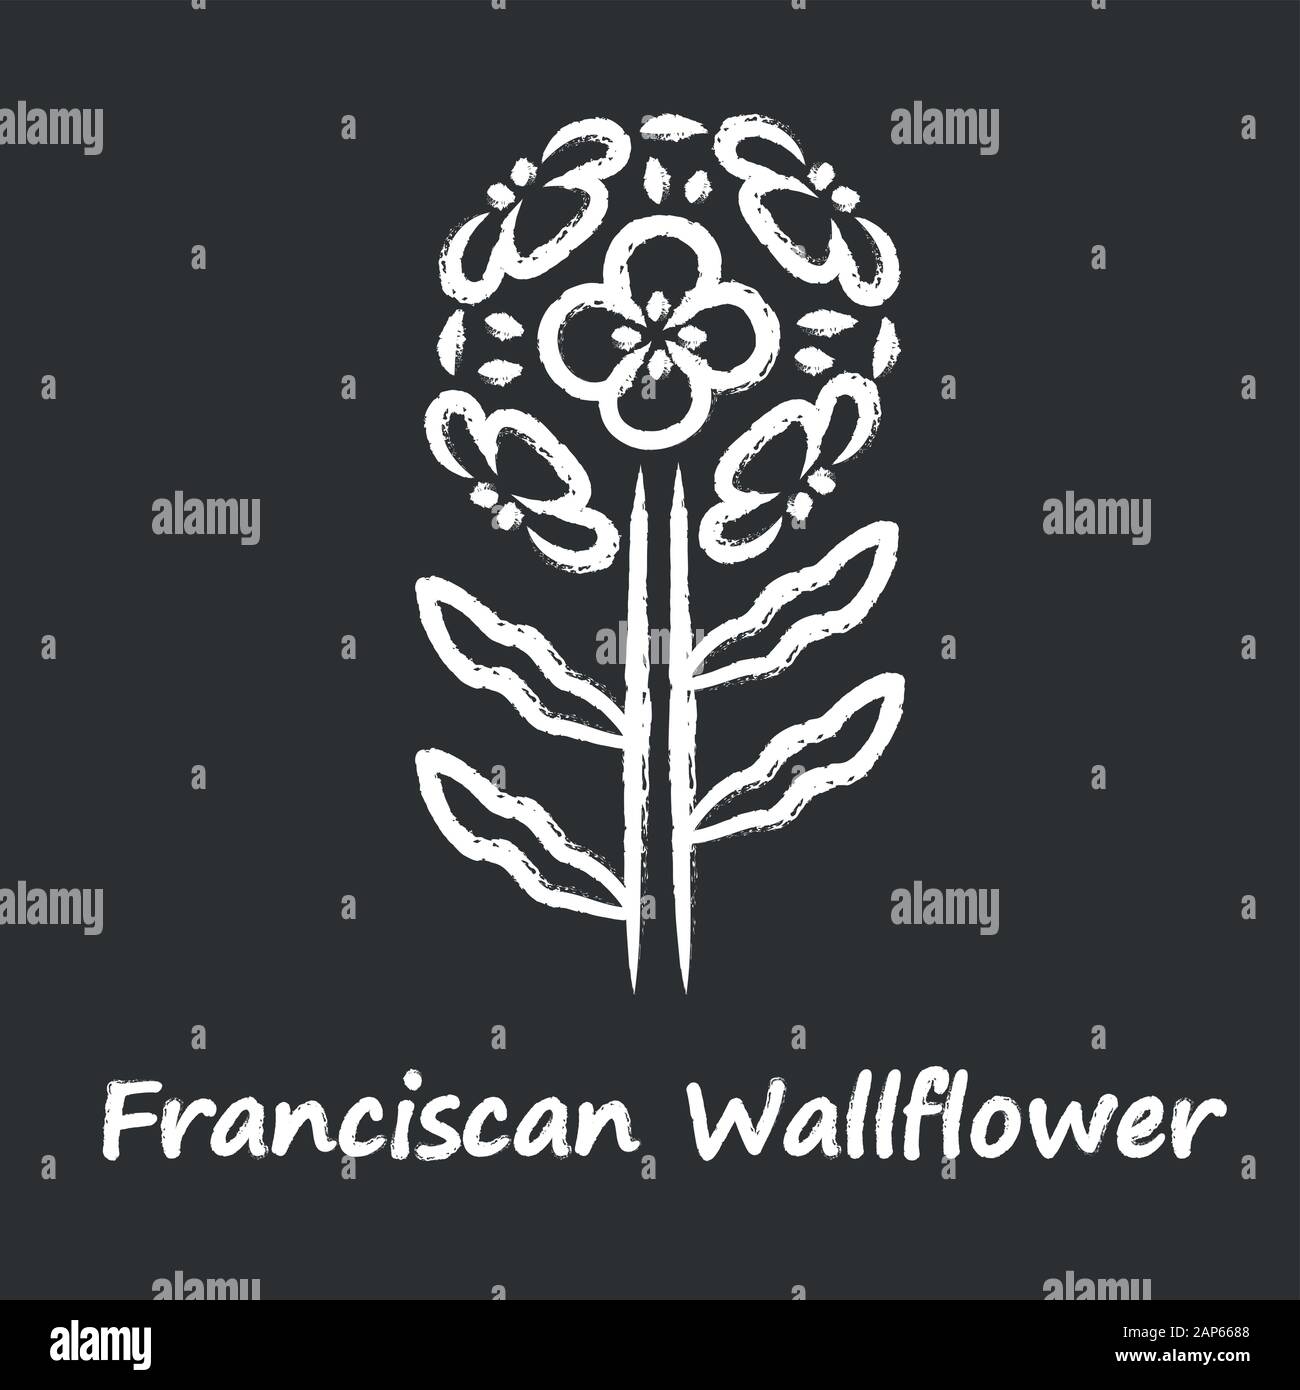 Franciscan wallflower chalk icon. Garden flowering plant with name inscription. Erysimum franciscanum inflorescence. Blooming wildflower, weed. Spring Stock Vector